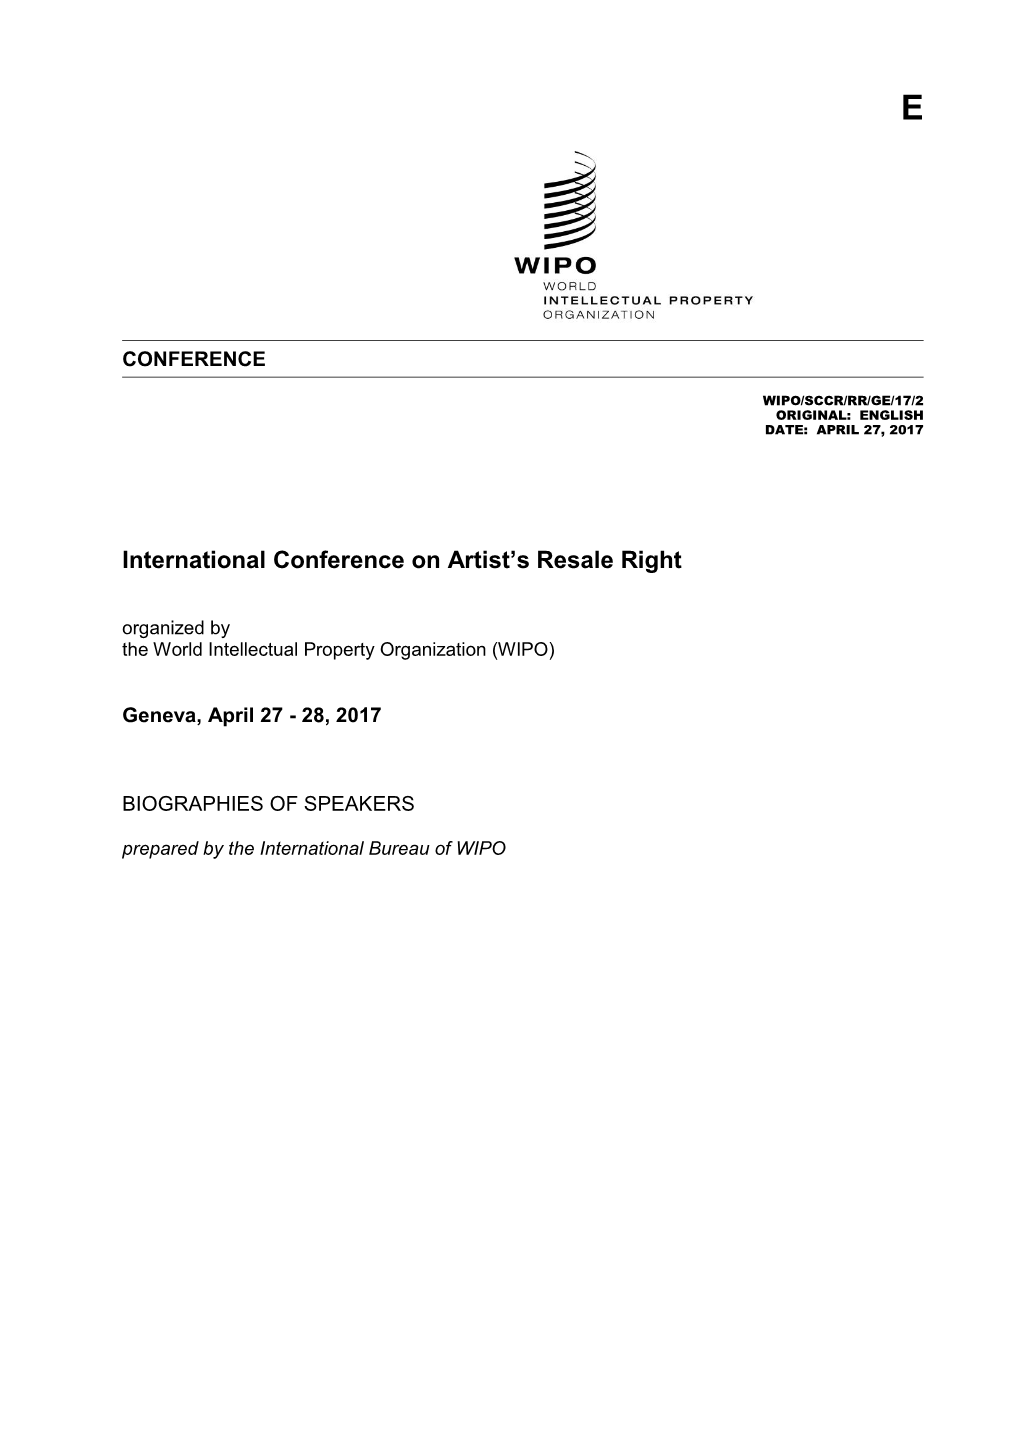 International Conference on Artist's Resale Right